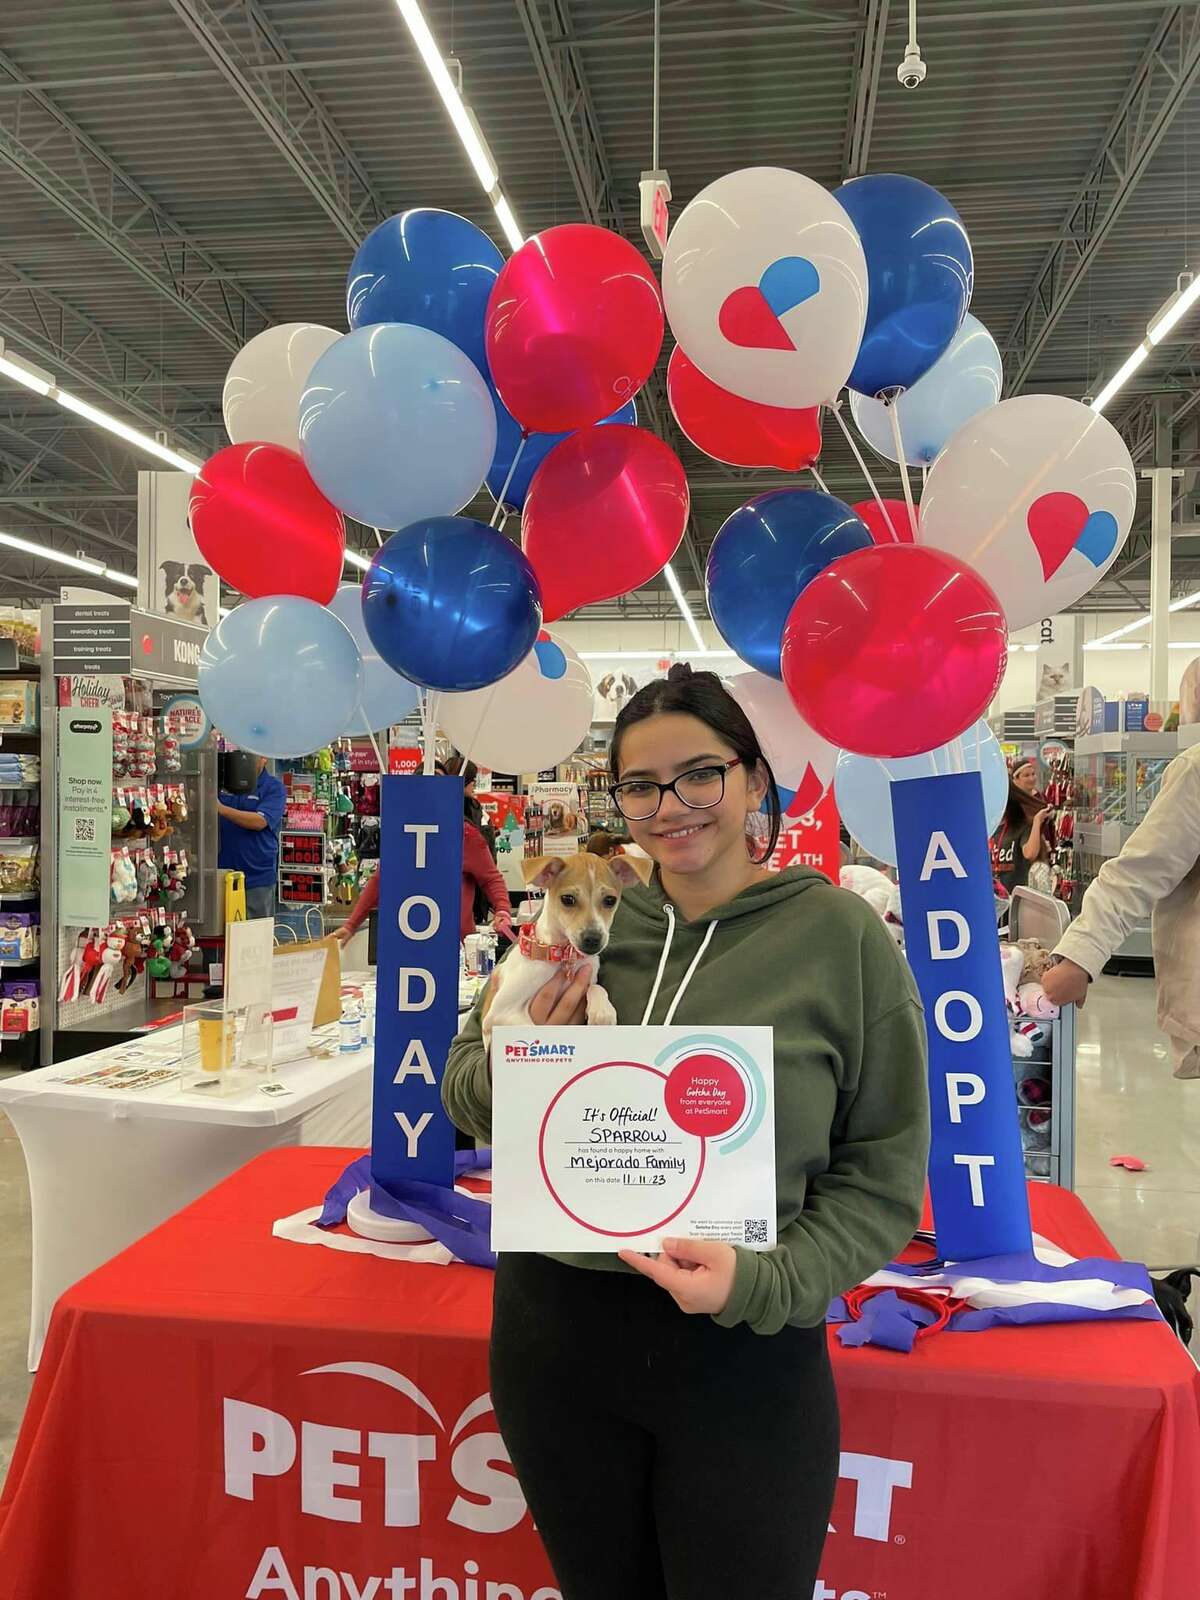 The Laredo Animal Protective Society and Best Friends For Life partnered with PetSmart to hold a three-day adoption event from Nov. 10-12 in honor of the PetSmart Charities National Adoption Week. 